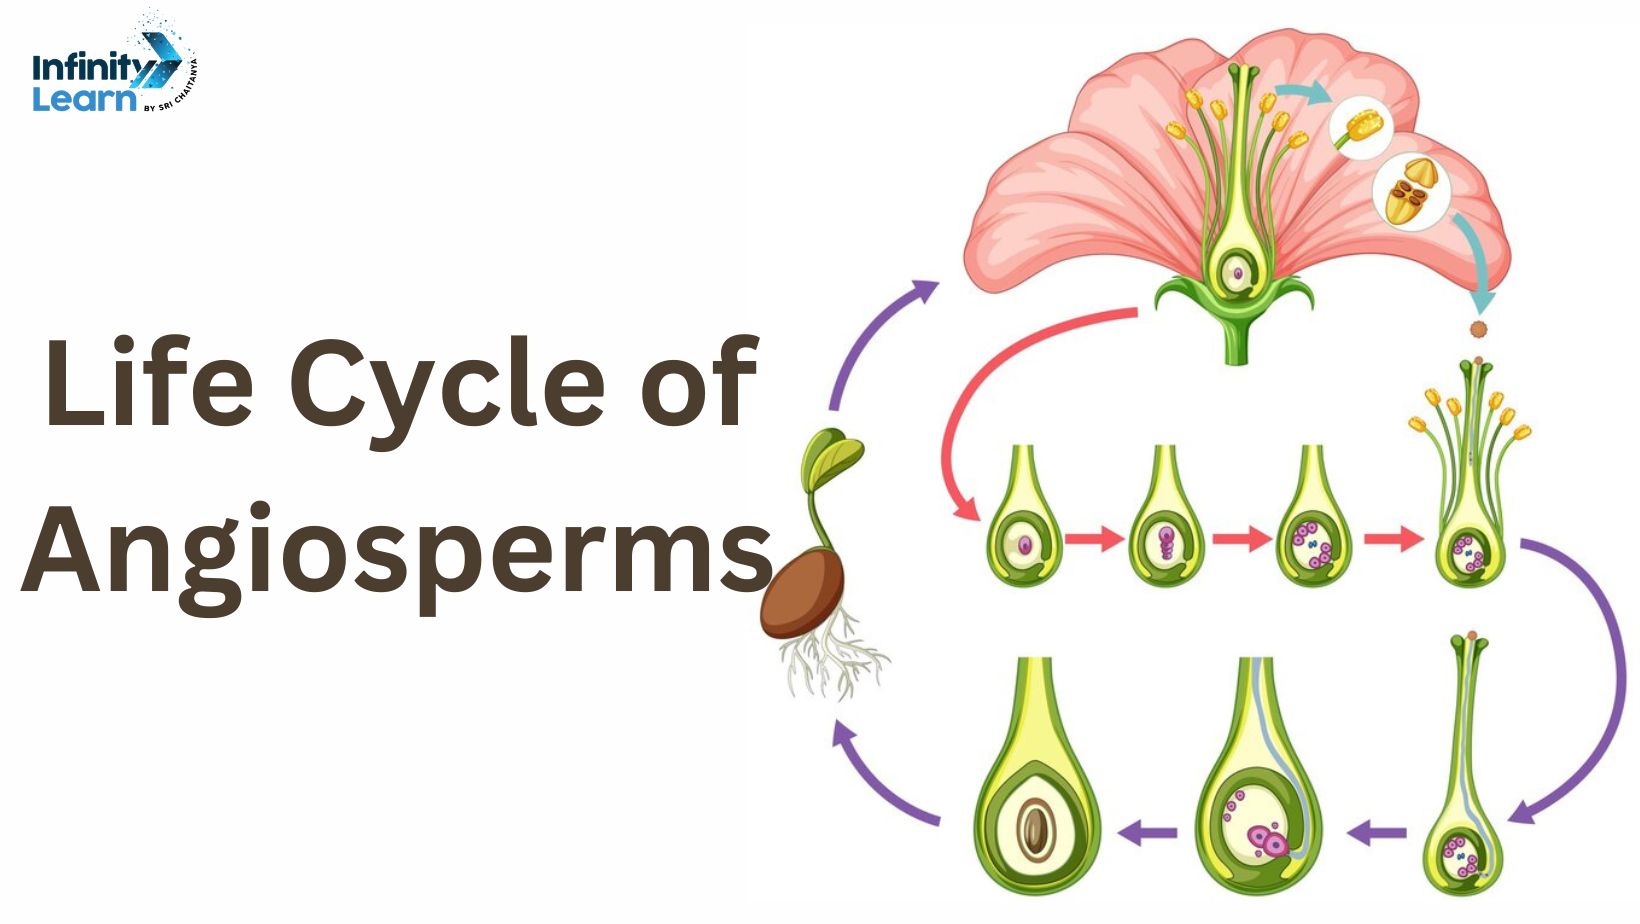 Life Cycle of Angiosperms